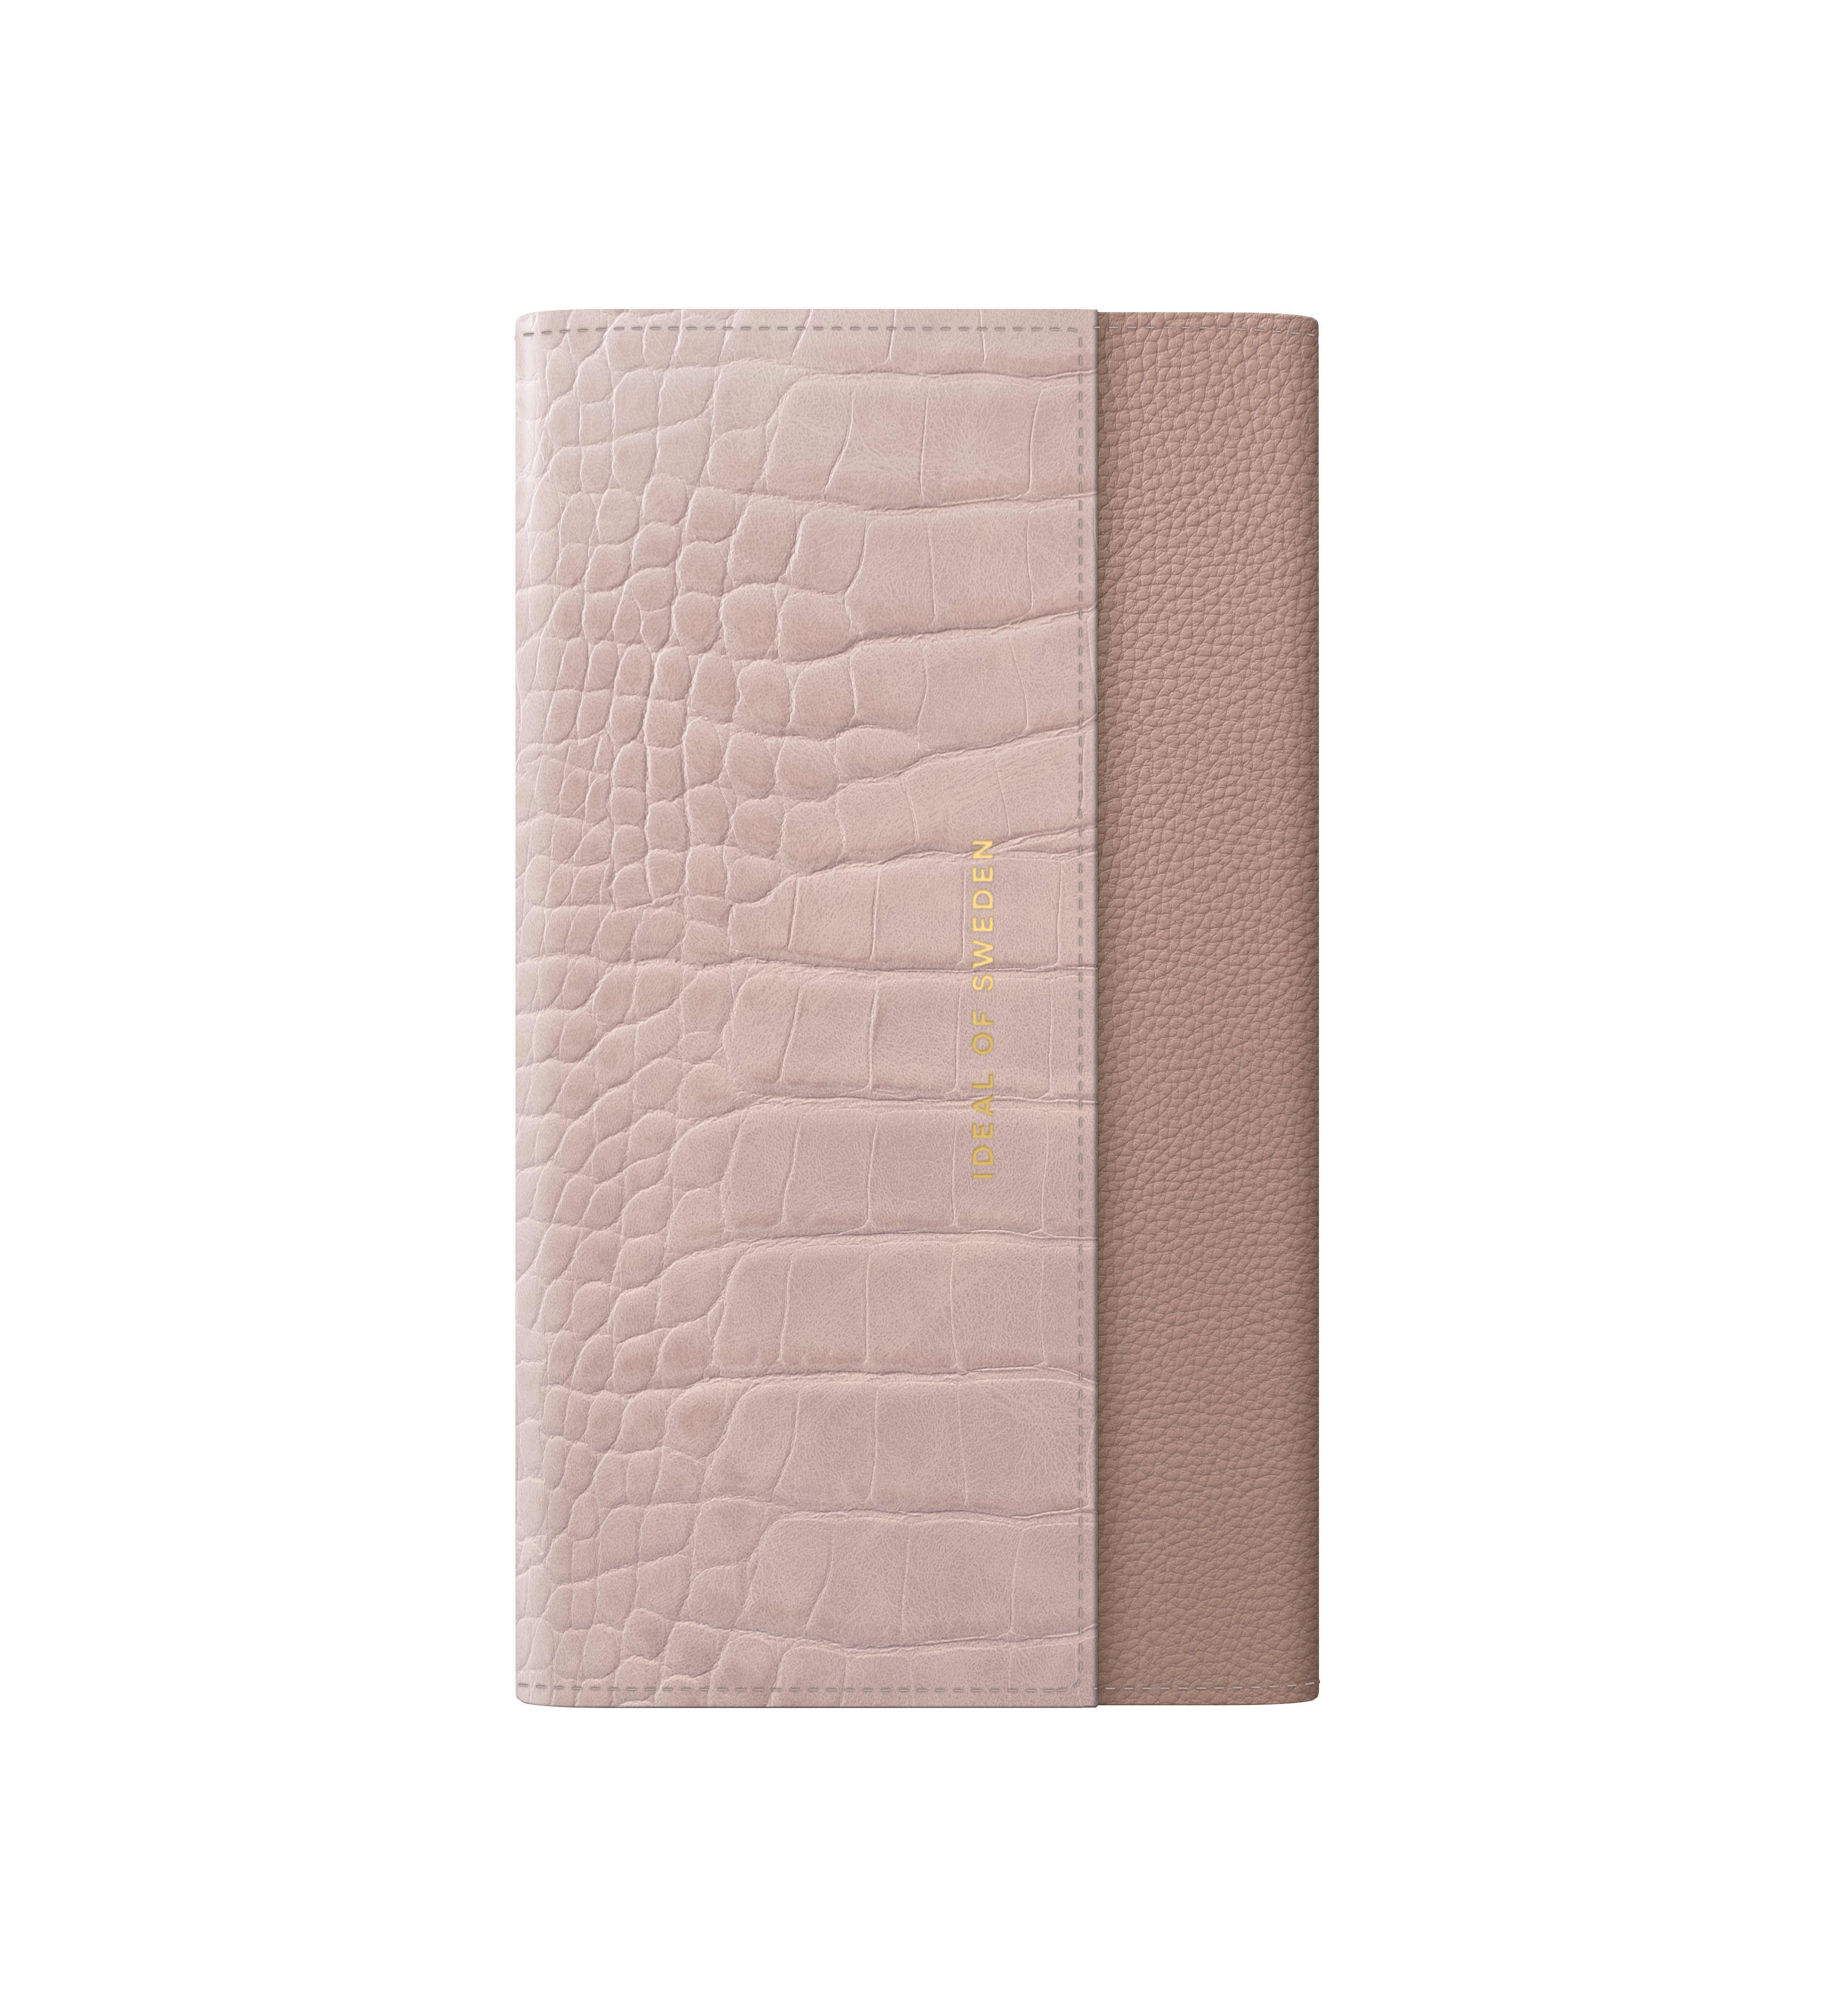 Misty iPhone OF IDSCSS20-I2061-211, Croco IDEAL Cover, 12 Pro, iPhone 12, Apple, SWEDEN Rose Full